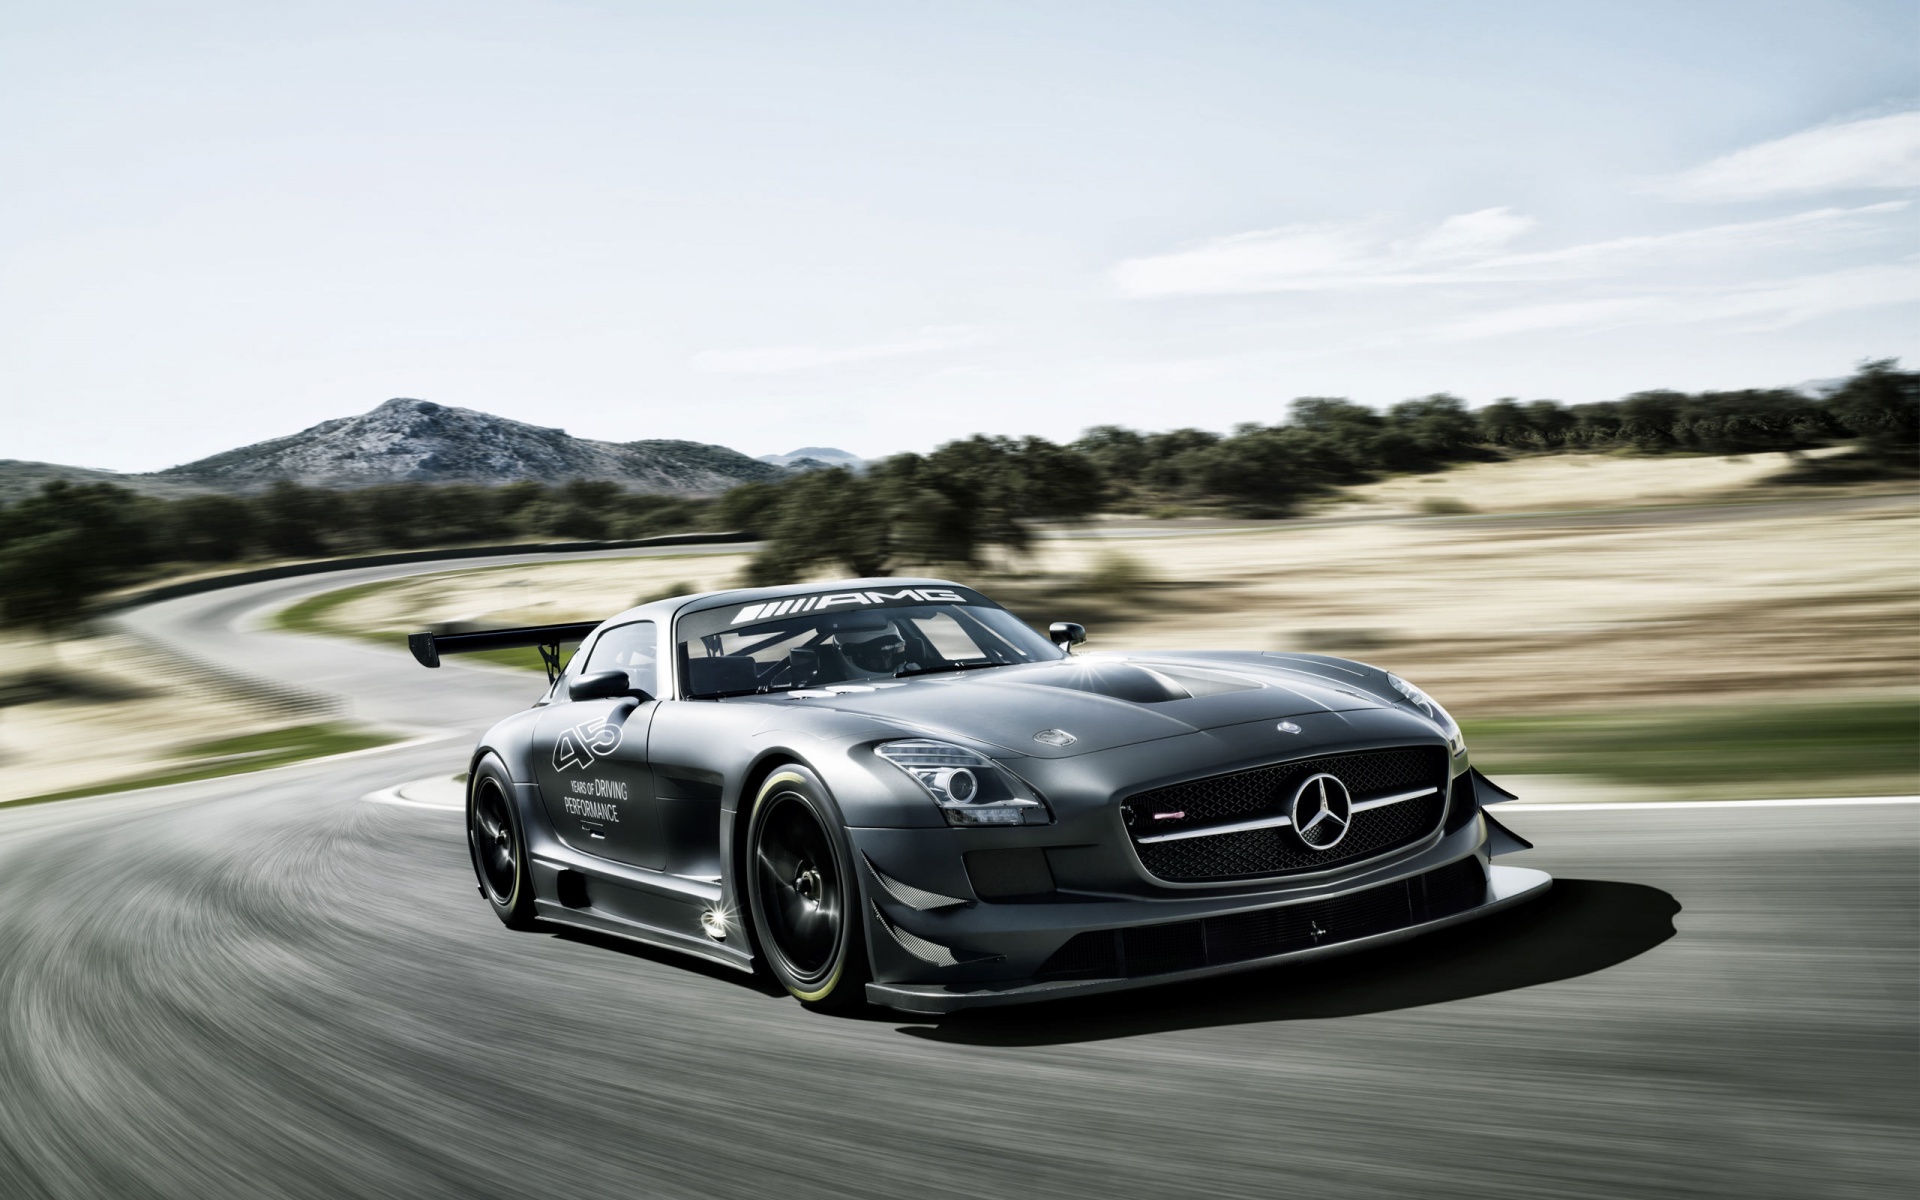 Mercedes-Benz SLS AMG Wallpapers, Pictures, Images